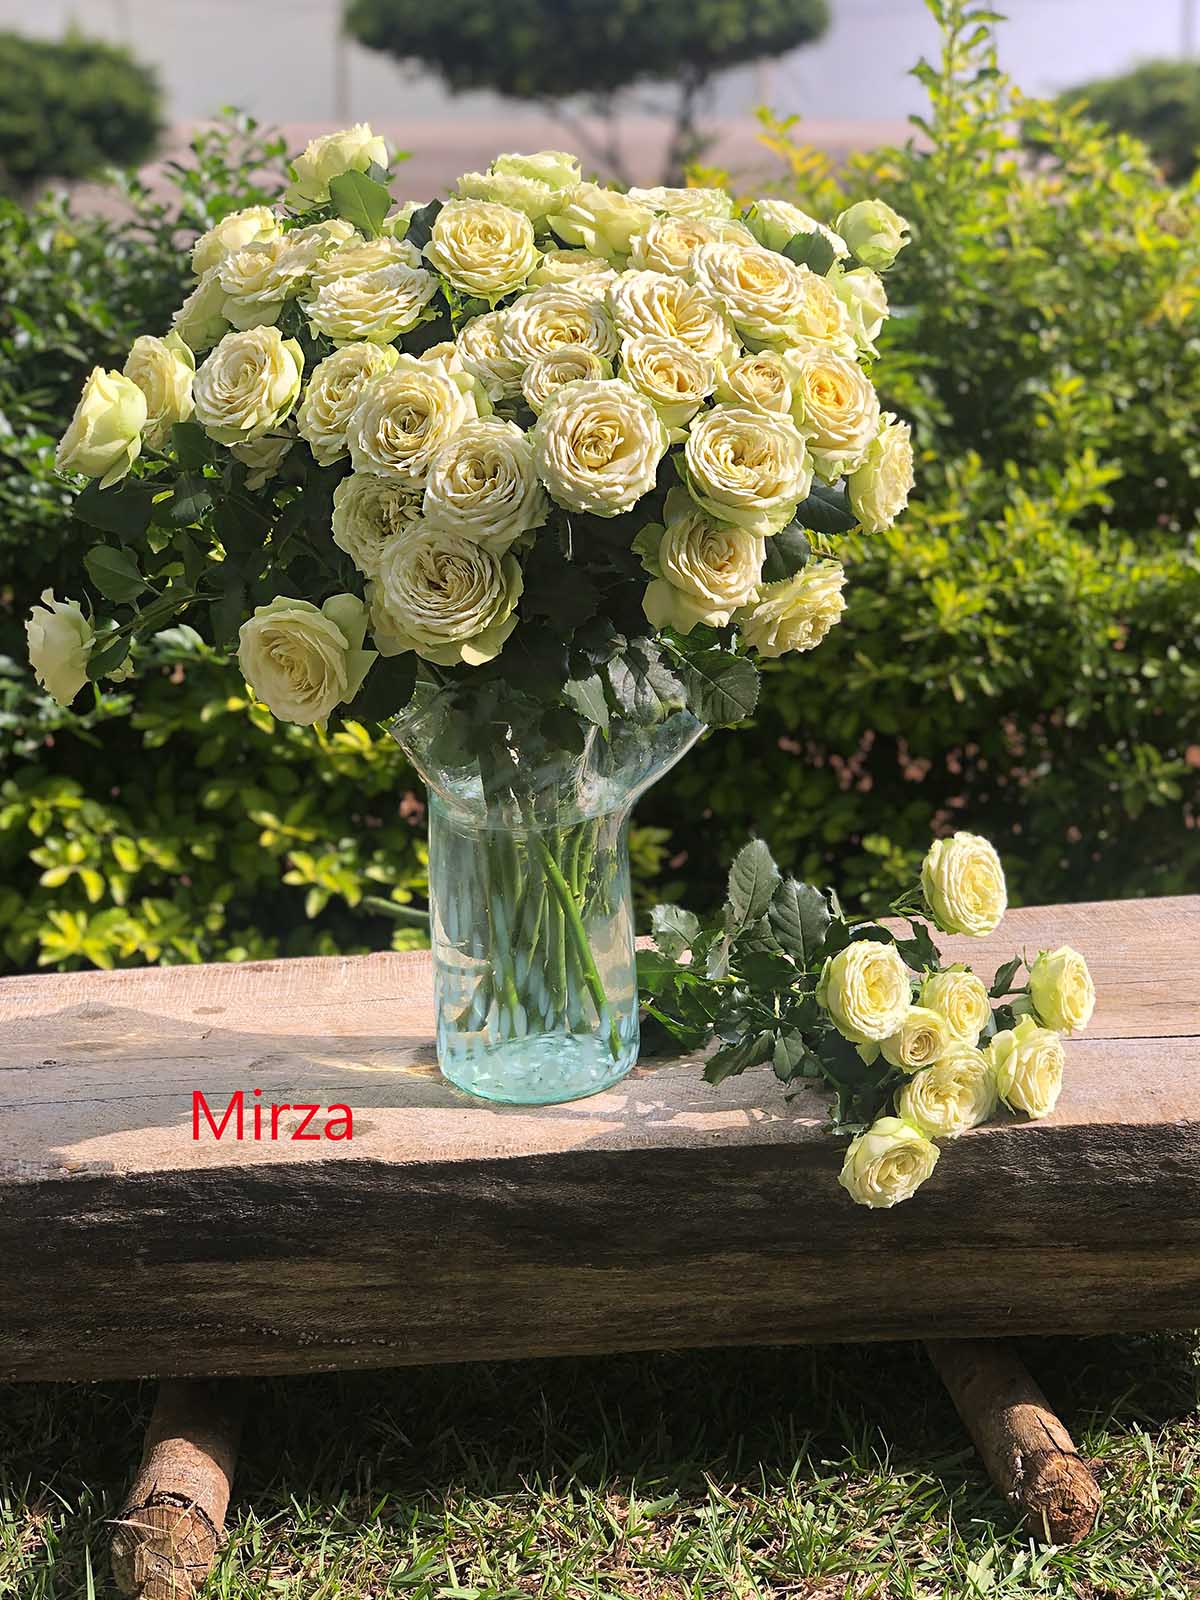 TOTF2021FE 06 Red Lands Roses - Rose Mirza